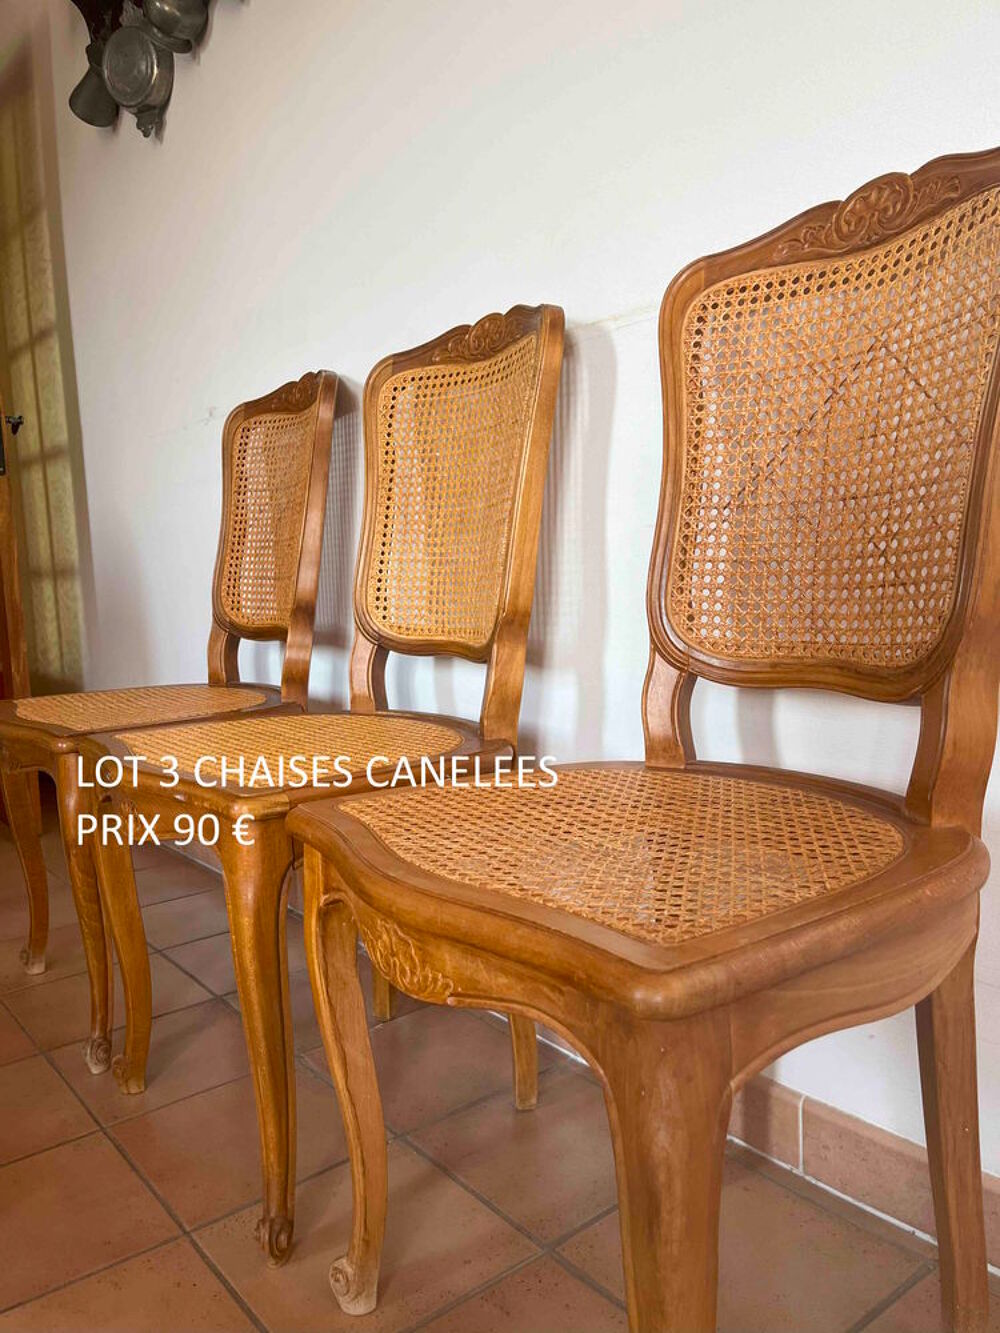 LOT 3 CHAISES CANNELEES Meubles